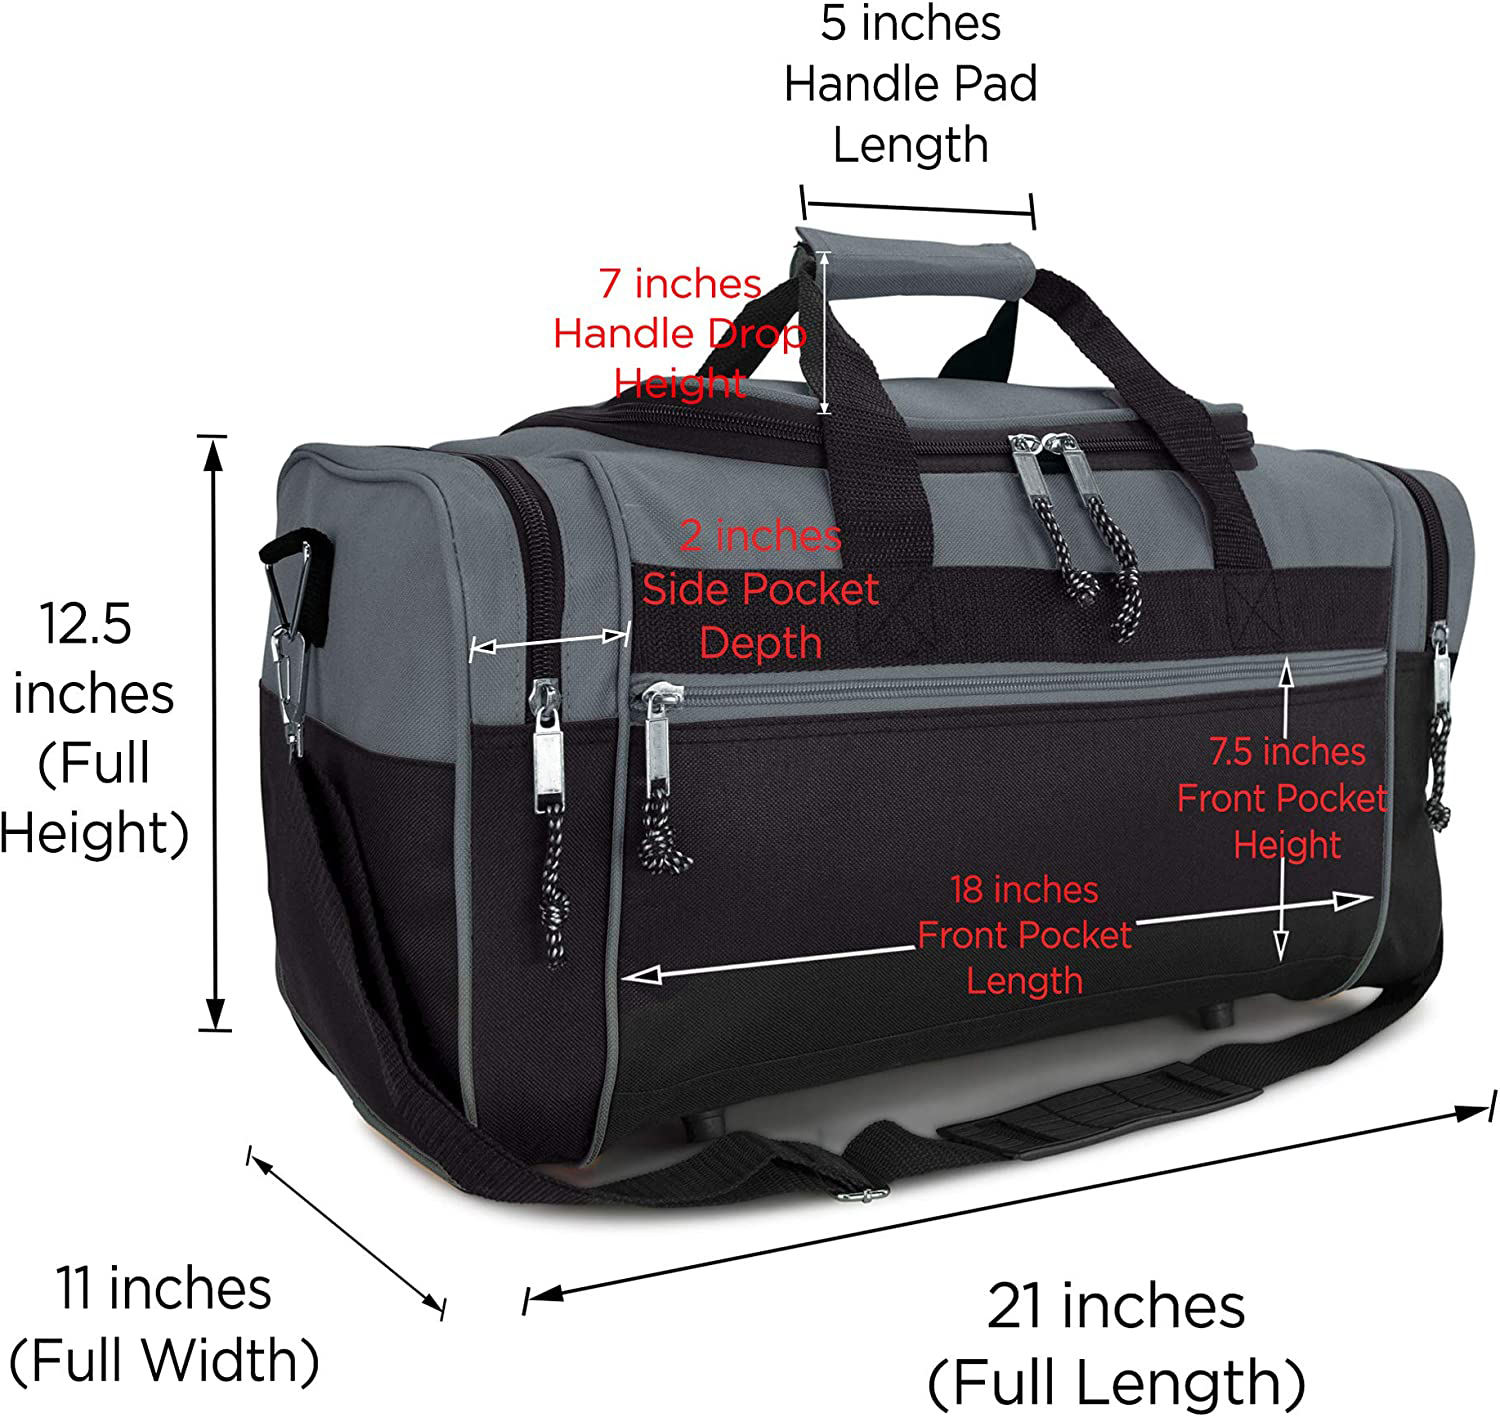 Custom High Sports Bag Quality Dry Outdoor Trip foldable Large Capacity Folding Travel Bags